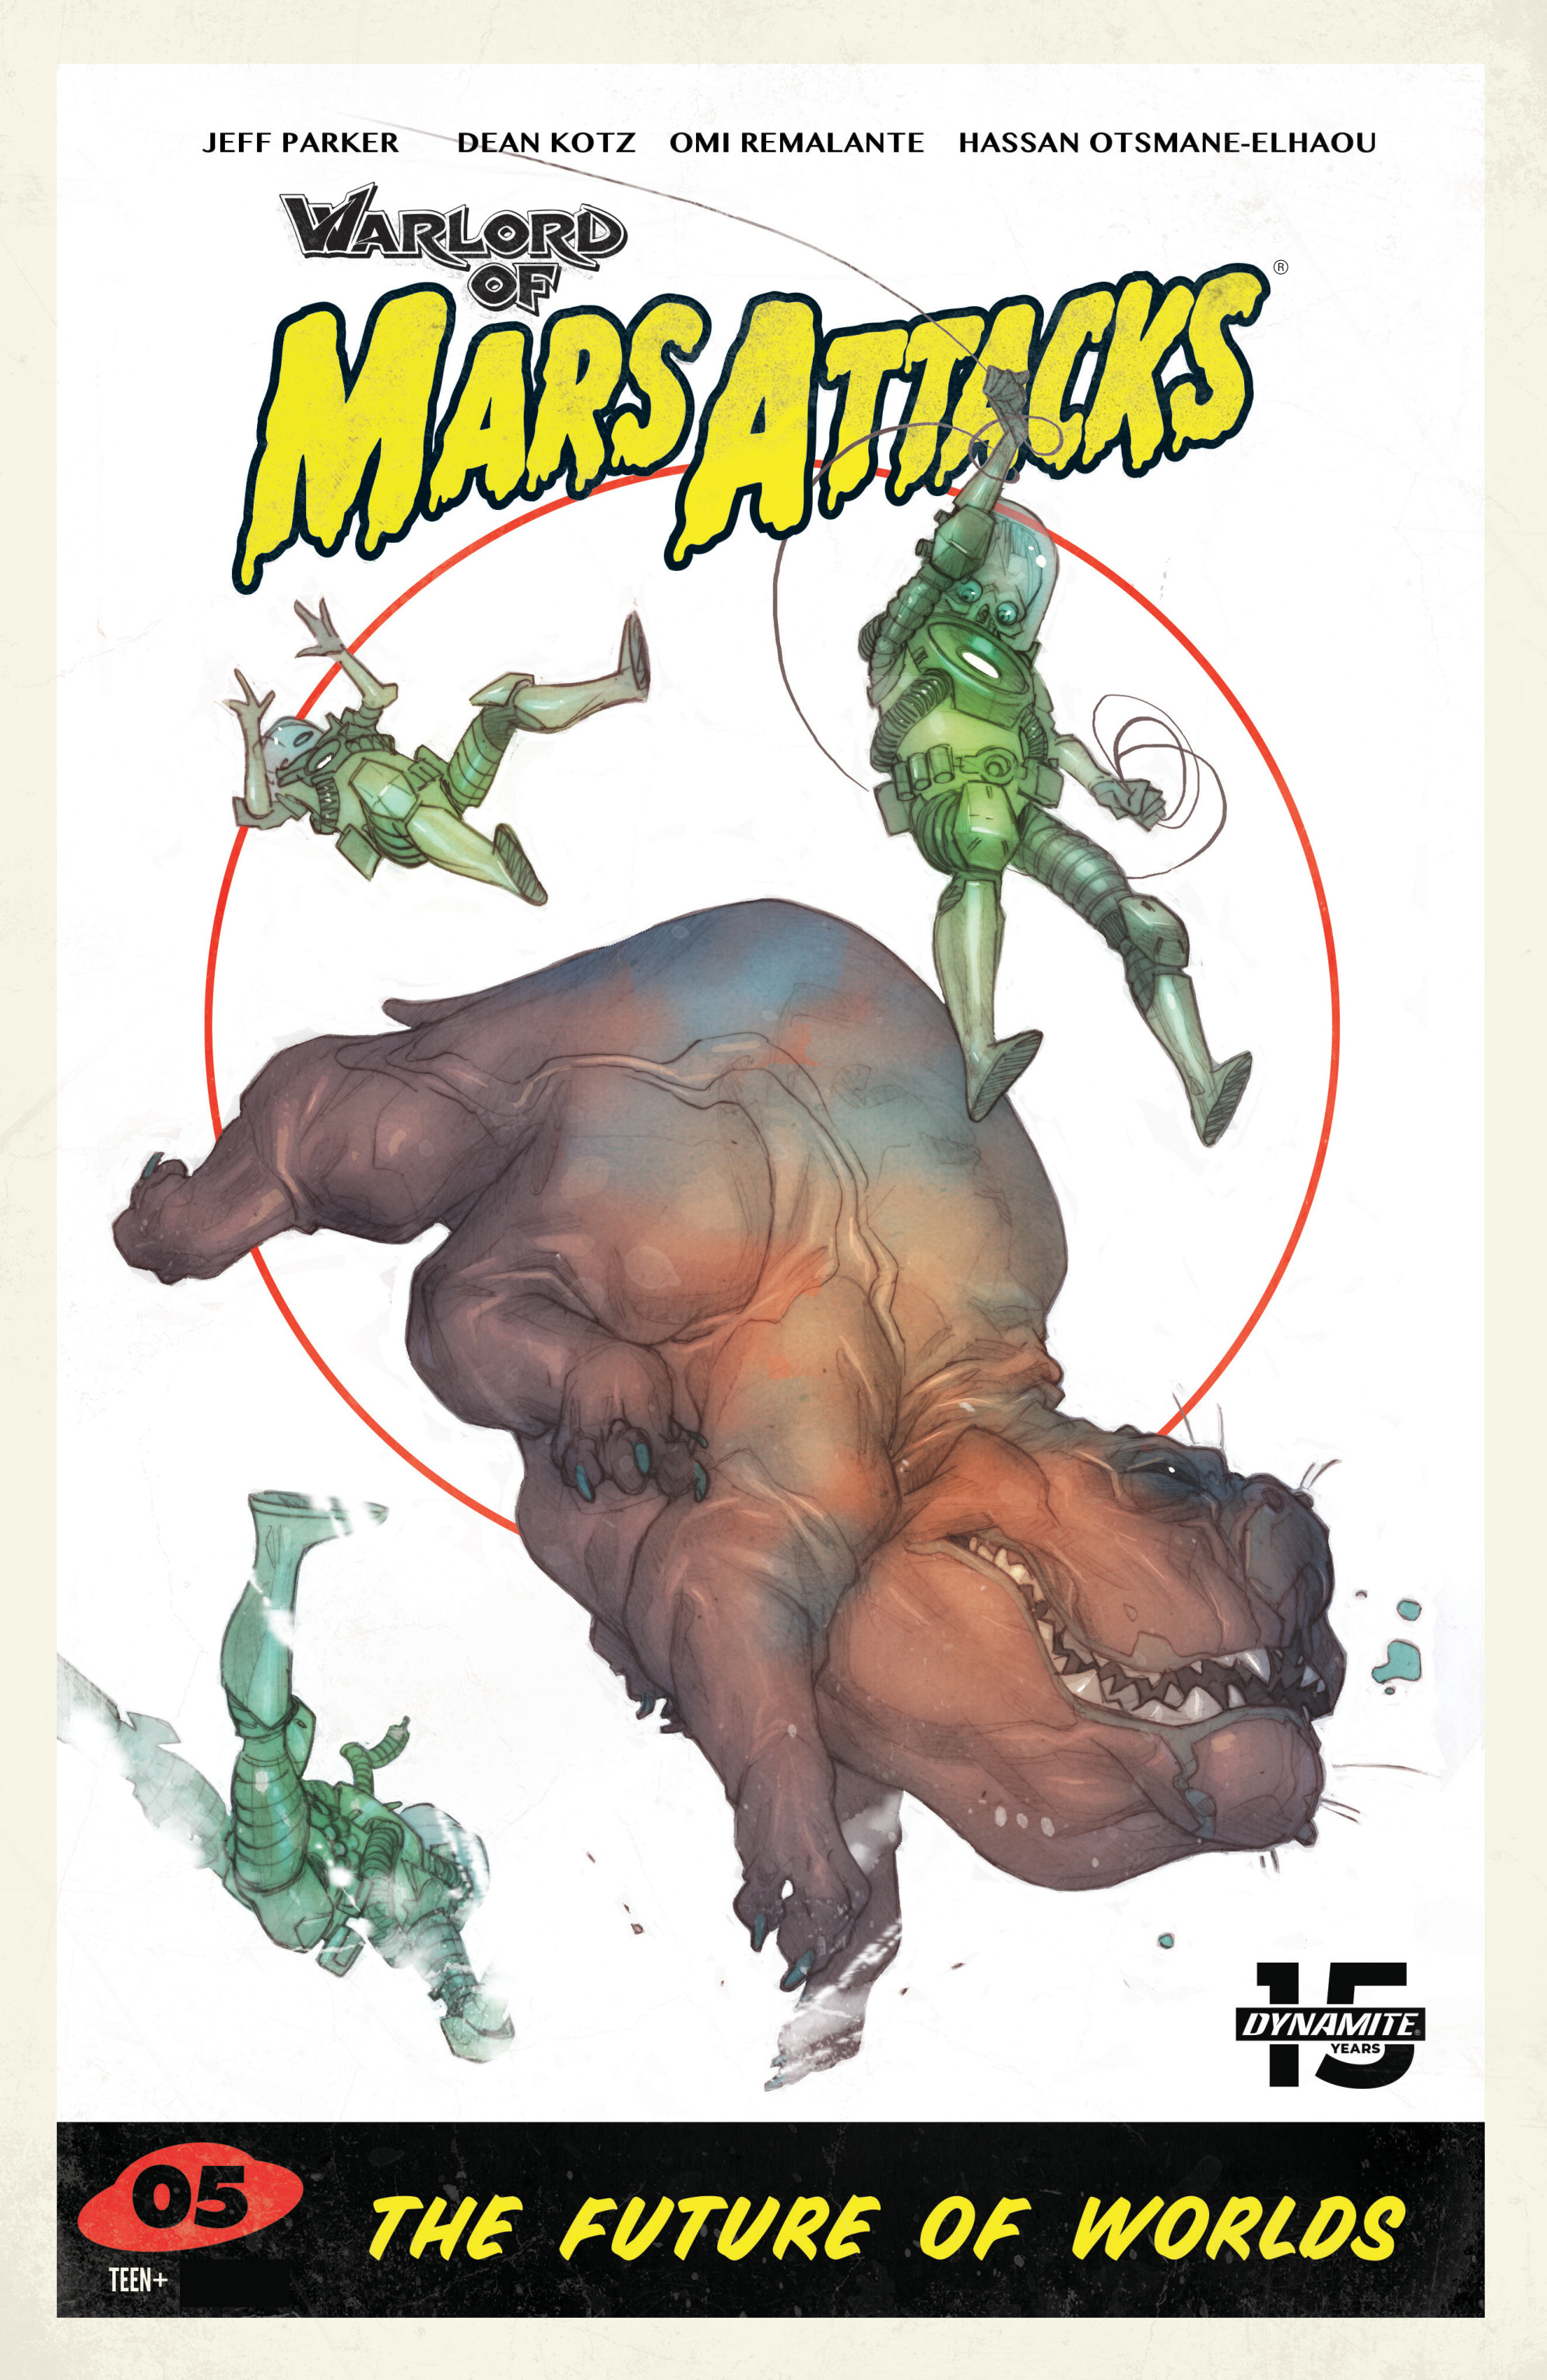 Read online Warlord of Mars Attacks comic -  Issue #5 - 4